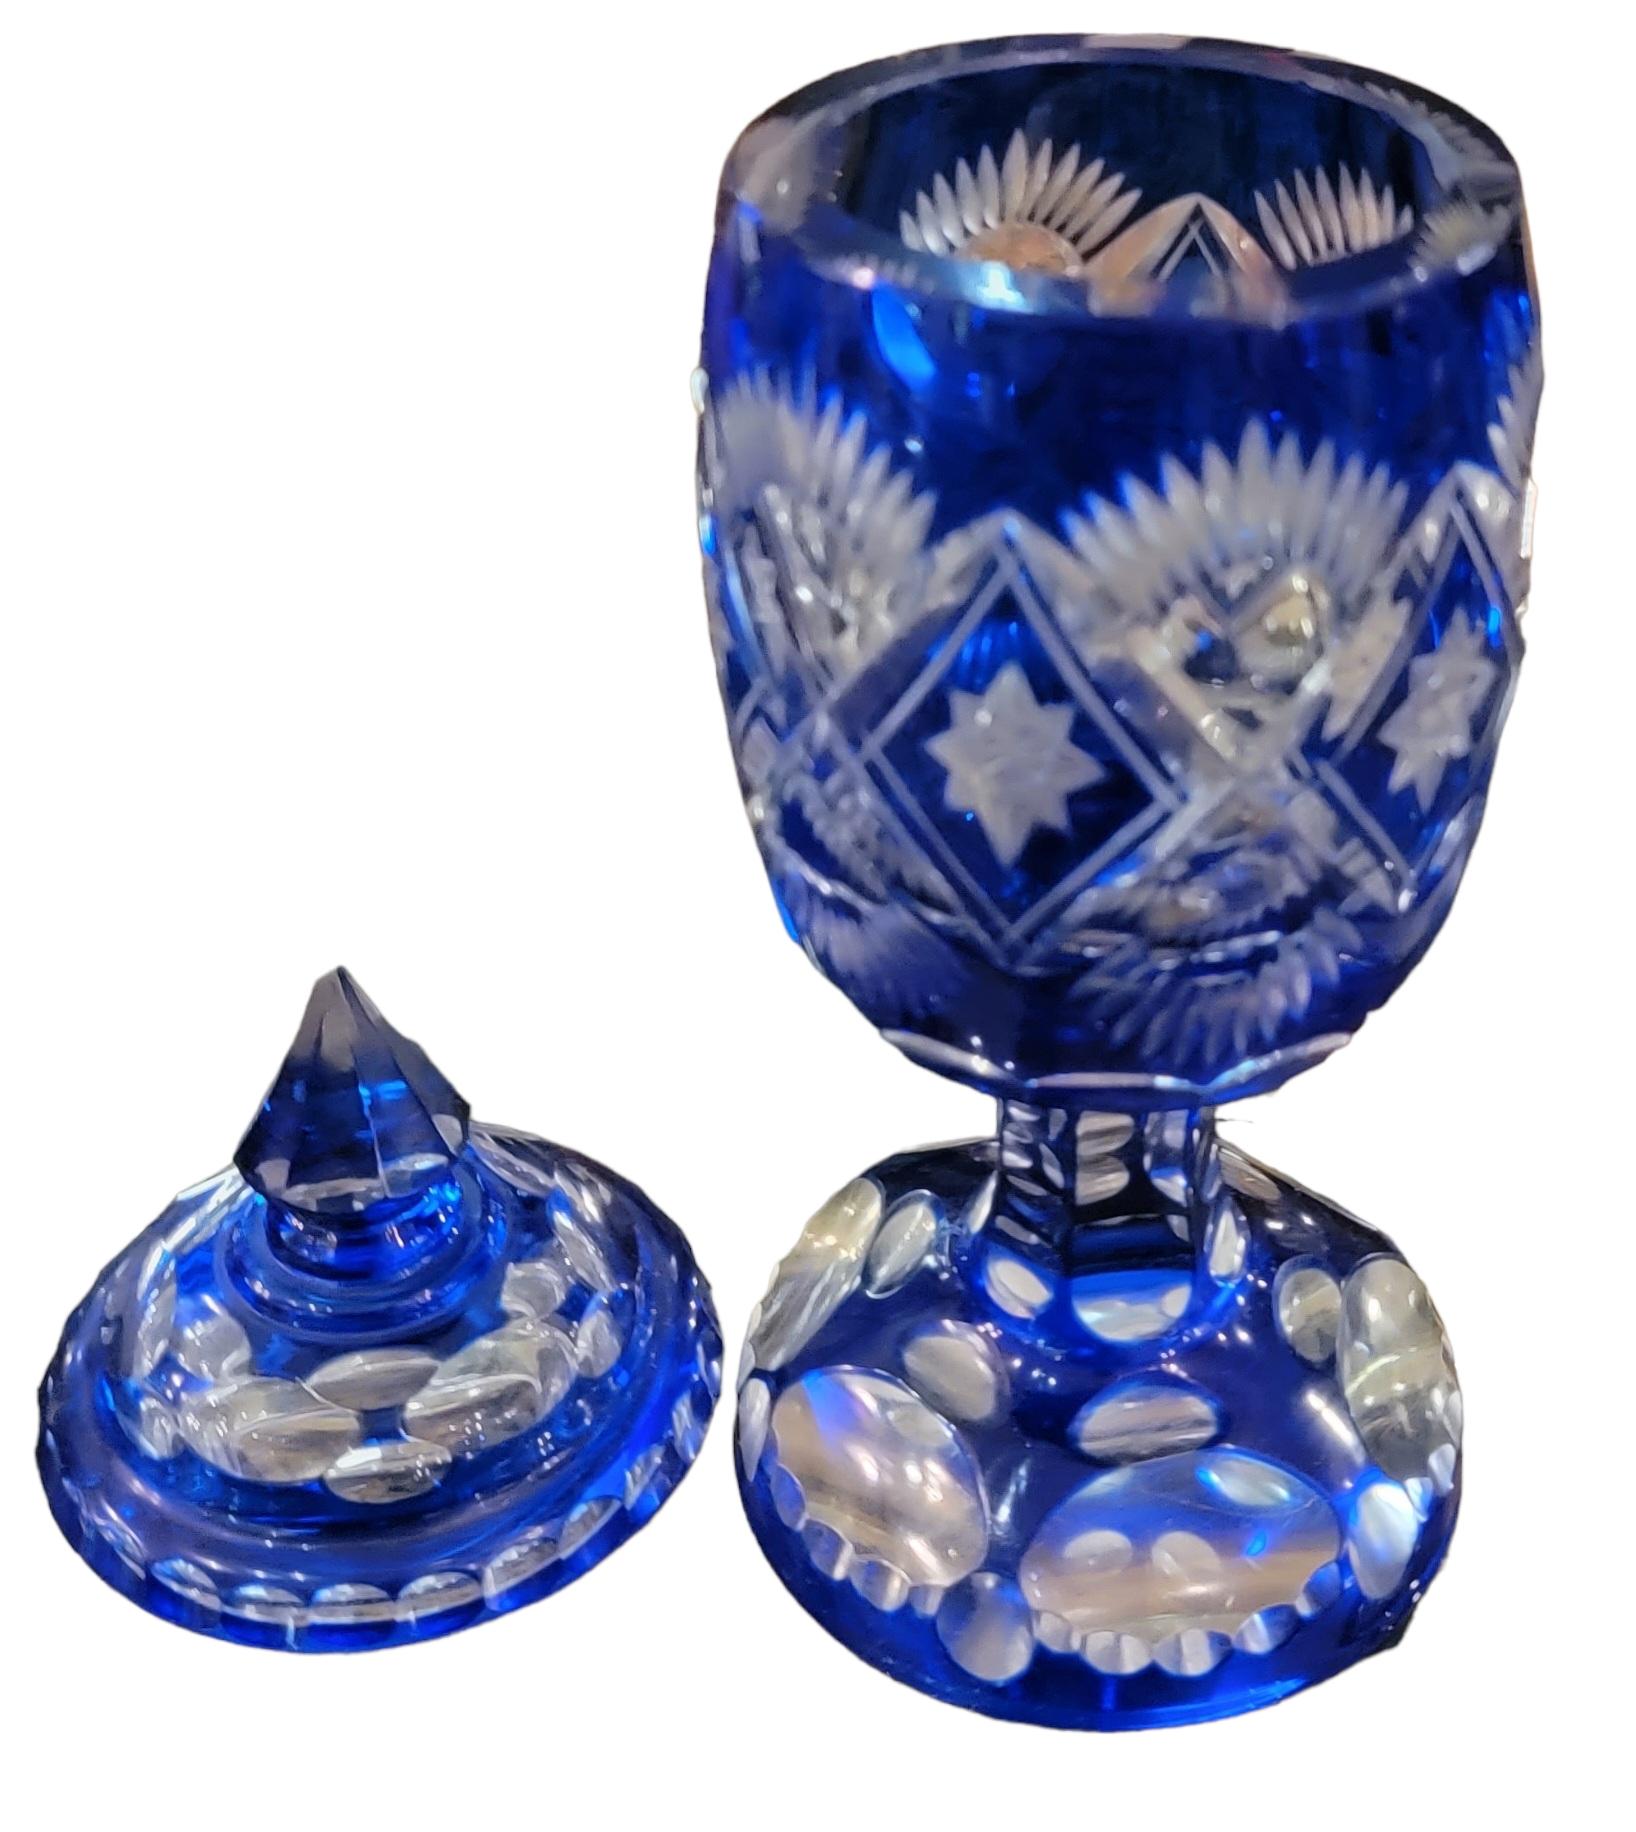 1930s Bohemian Heavily carved Lidded Jar with transparent cobalt blue coloring. measures approx - 9.5 h x 3.25diamter
